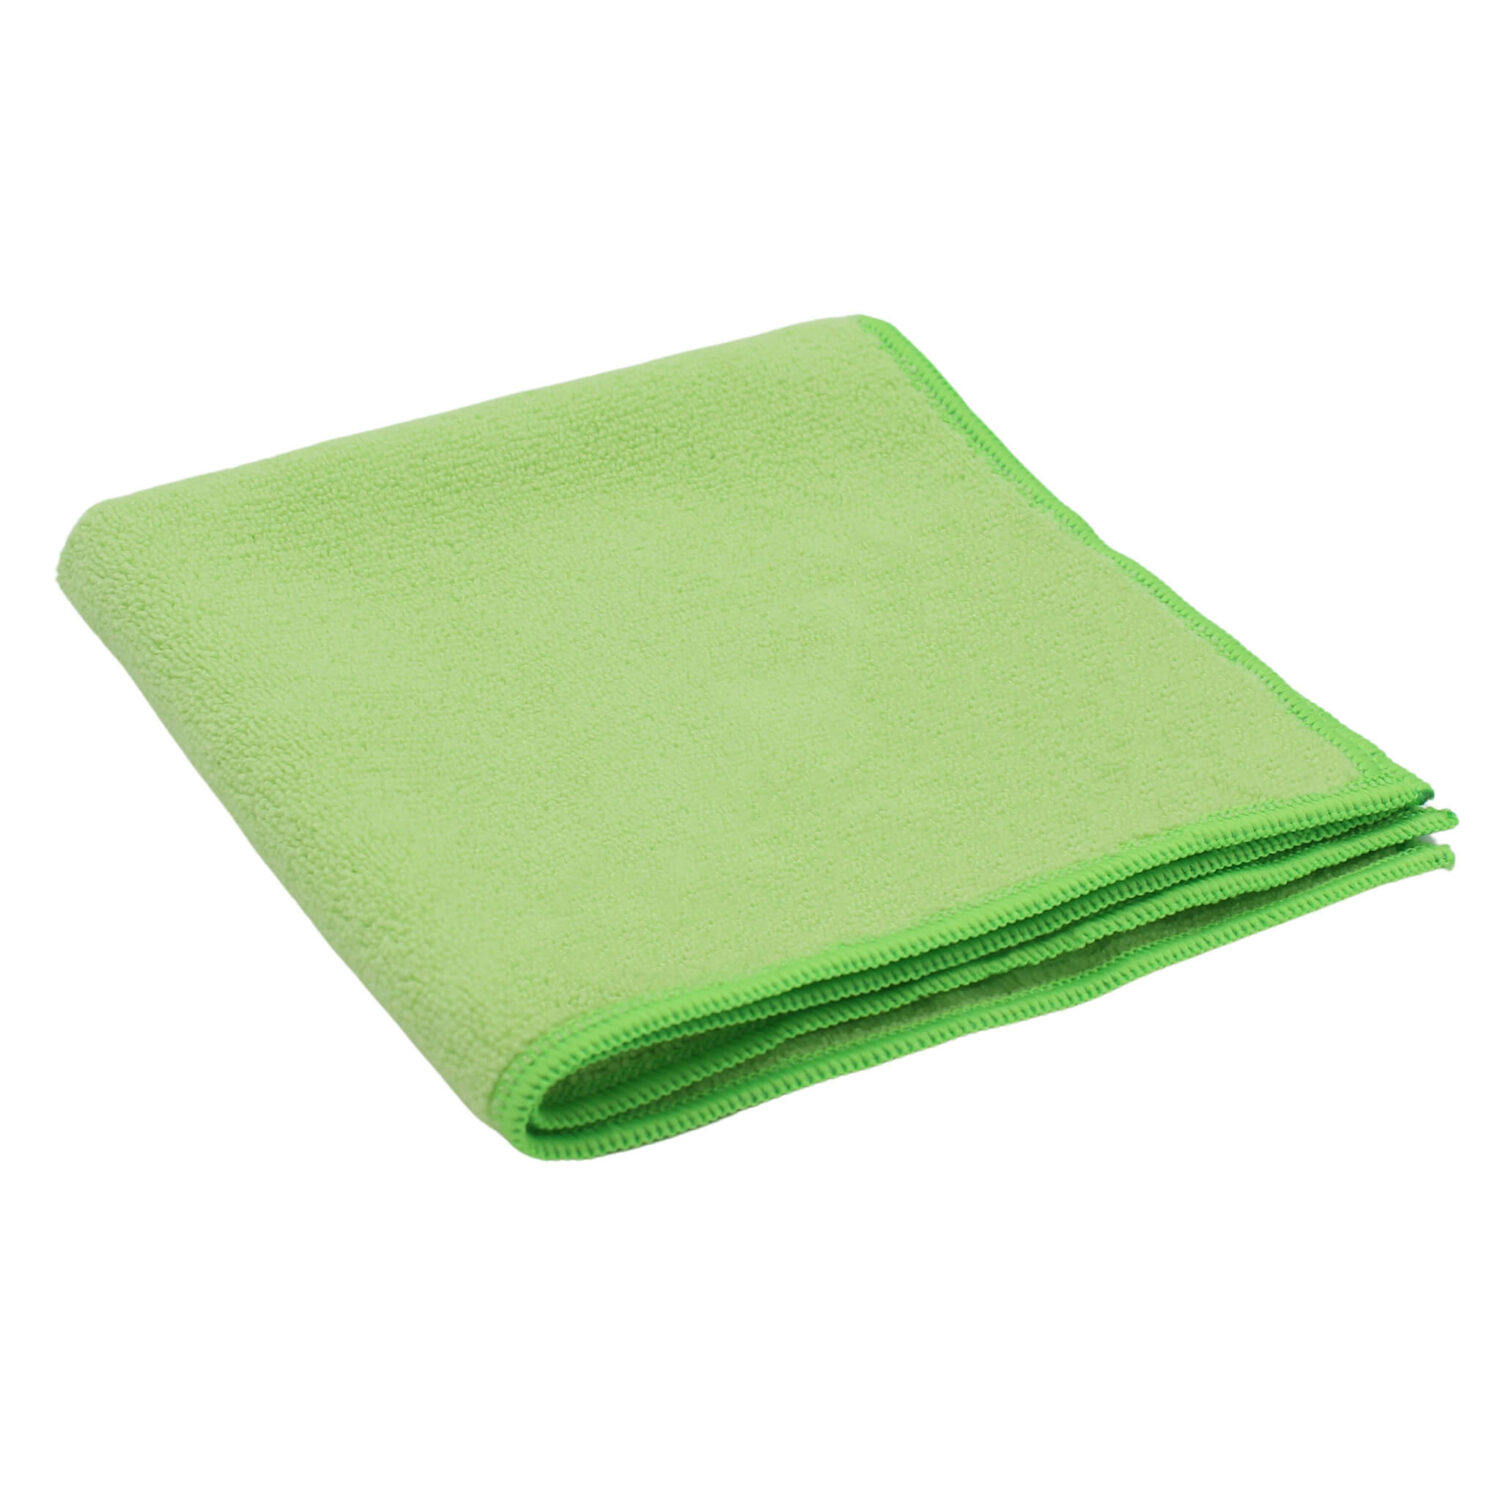 Box of 5 Soft & Recycled Cleaning Cloths